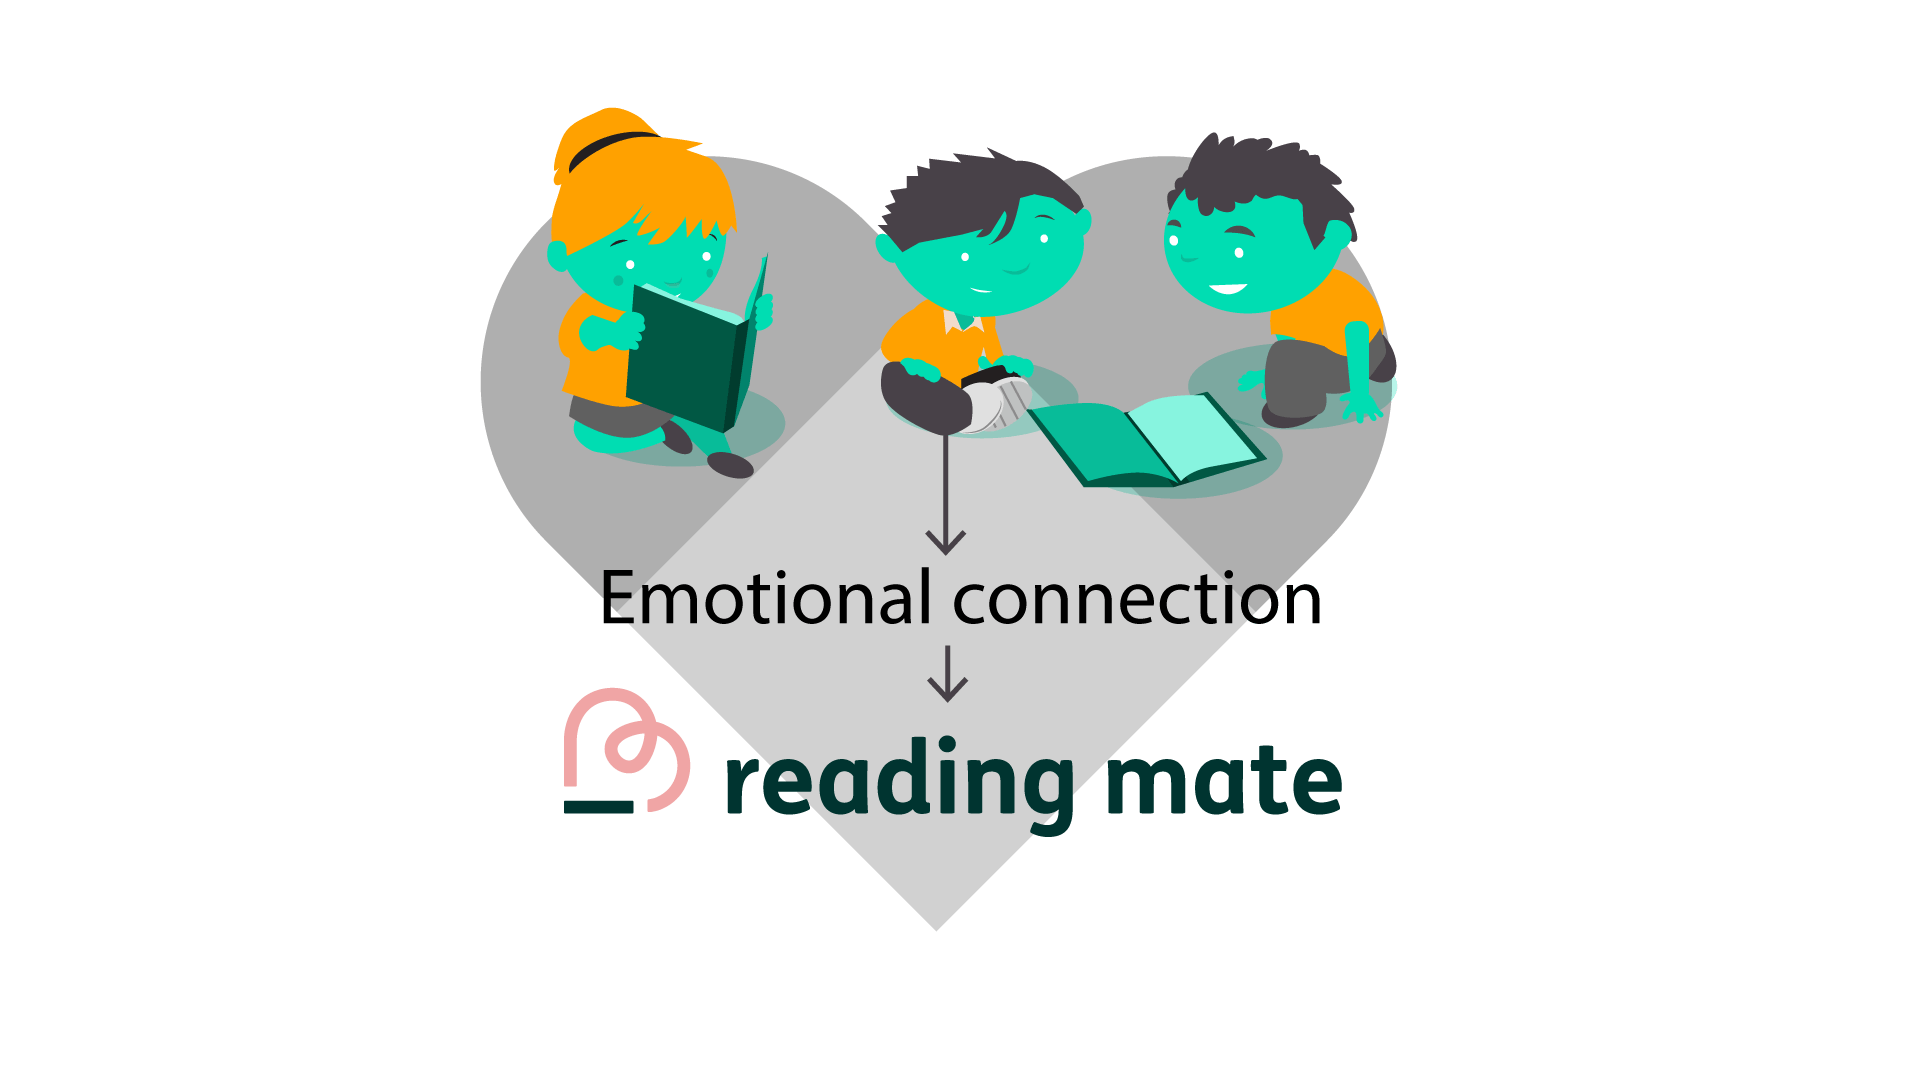 Creating an emotional connection